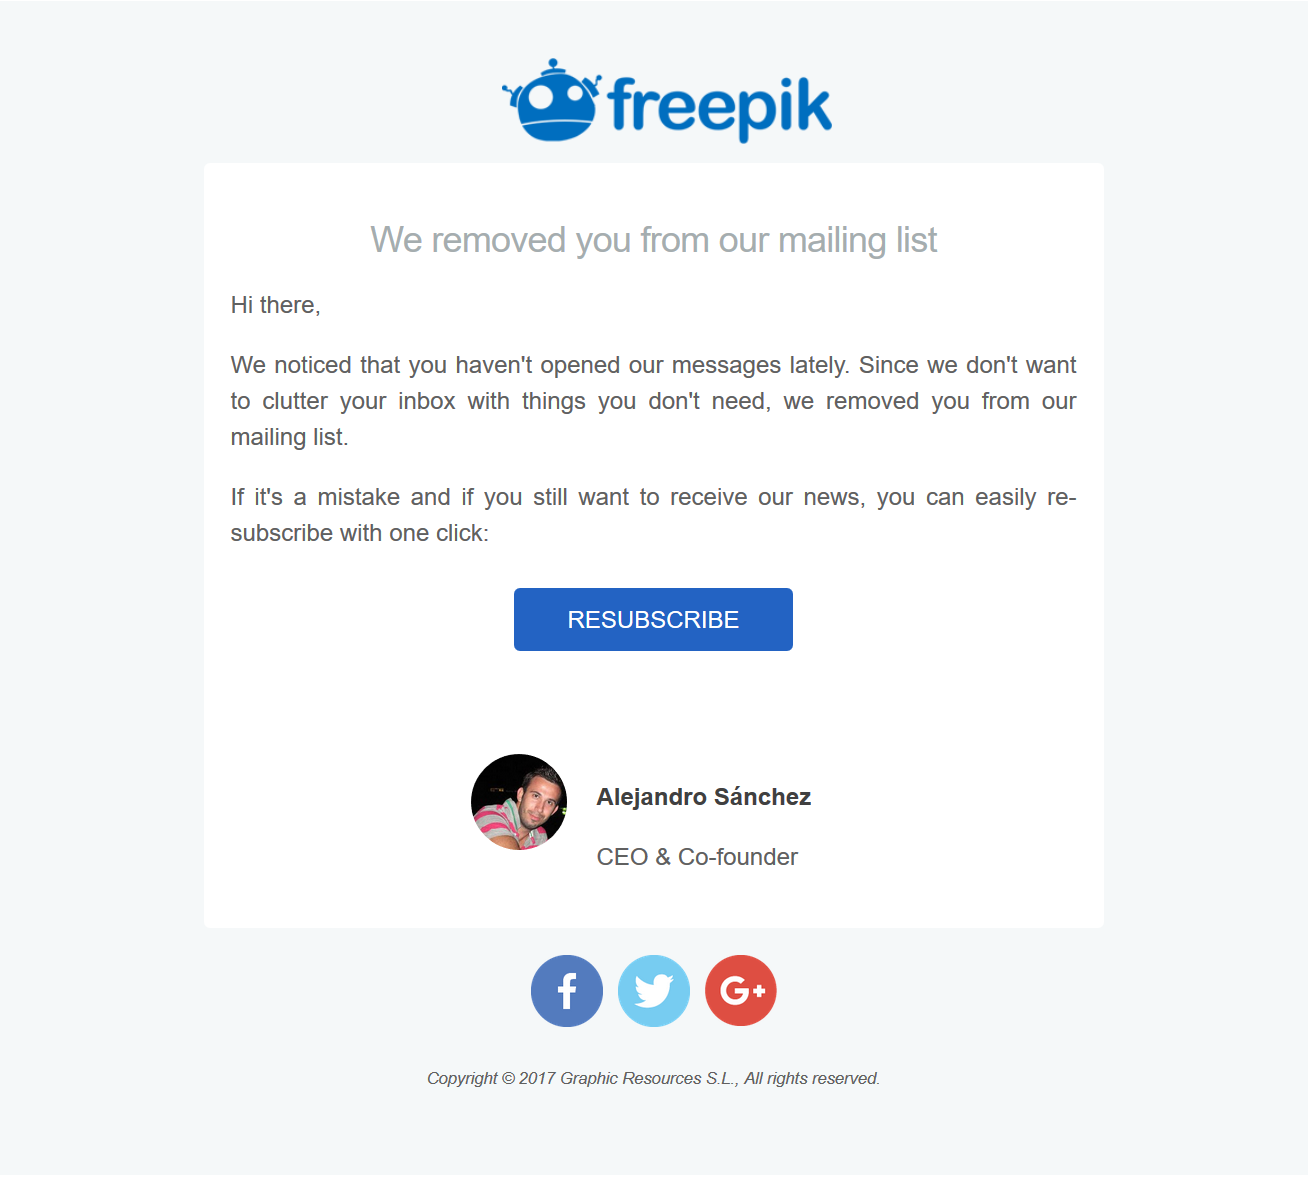 Email from freepik telling me I have been unsubscribed because I did not read their emails